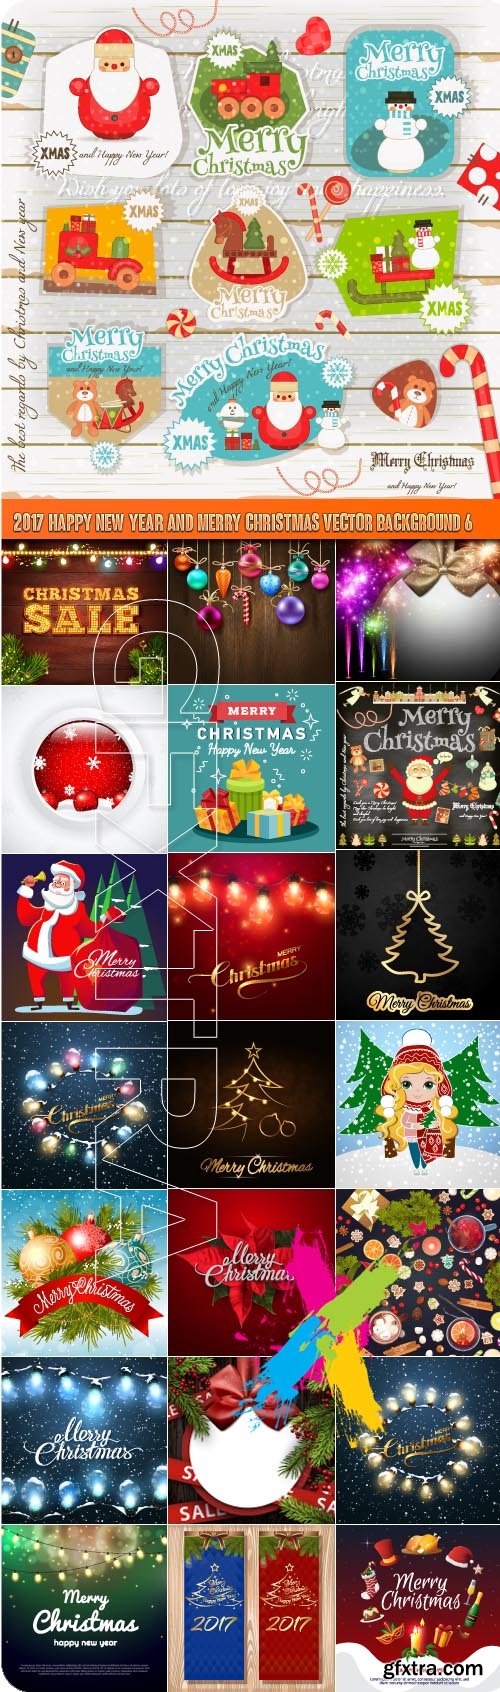 2017 Happy New Year and Merry Christmas vector background 6